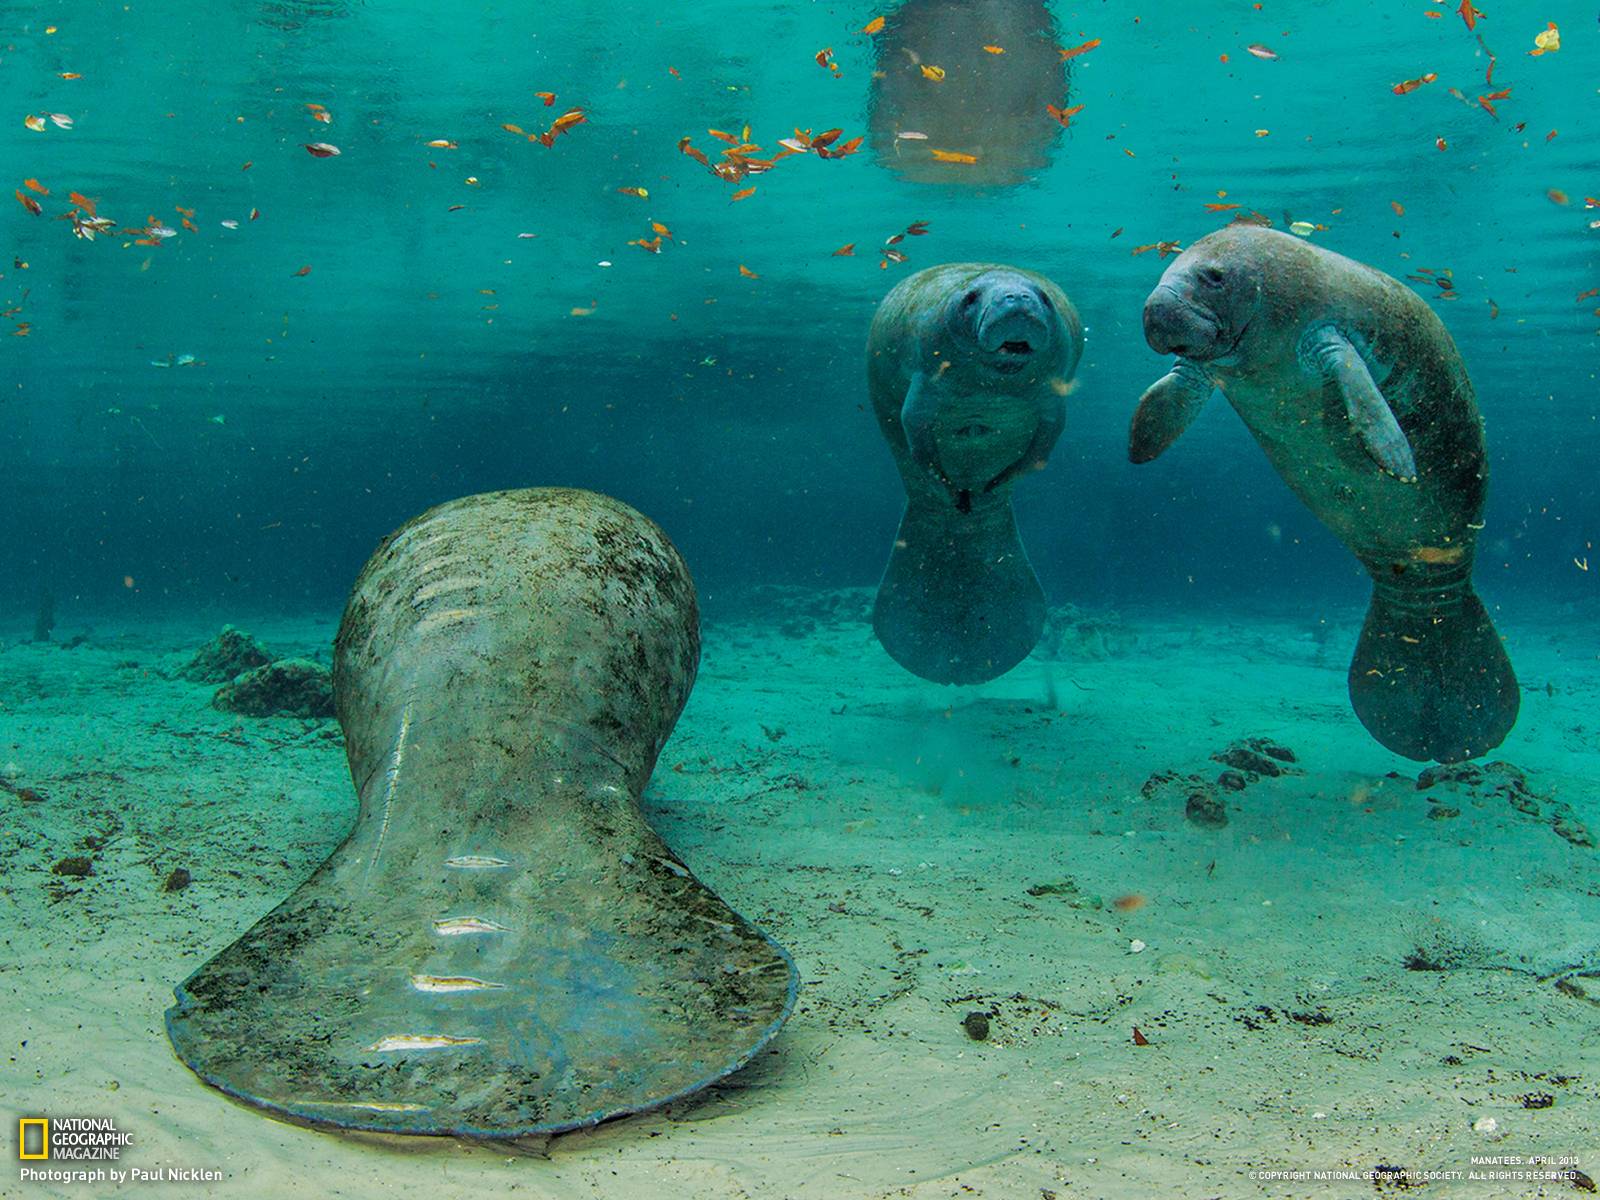 Manatee Picture - Underwater Wallpaper - National Geographic